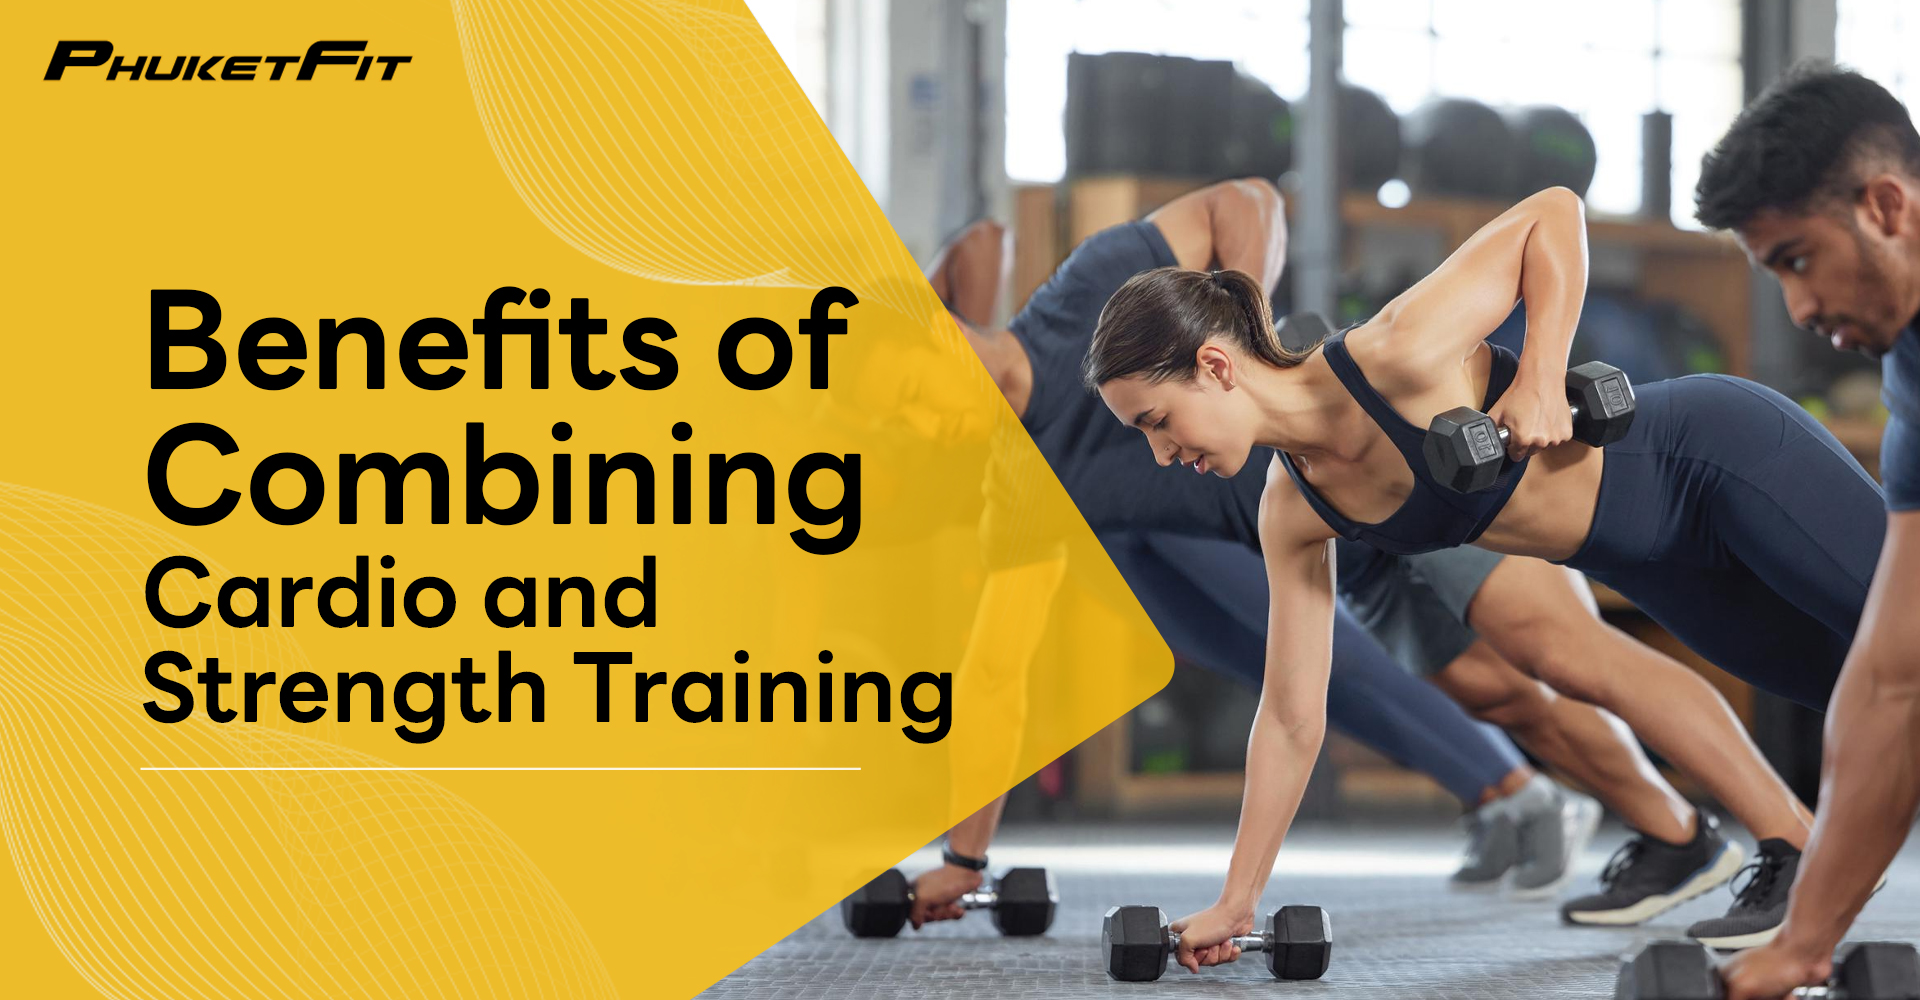 Benefits-of-Combining-Cardio-and-Strength-Training